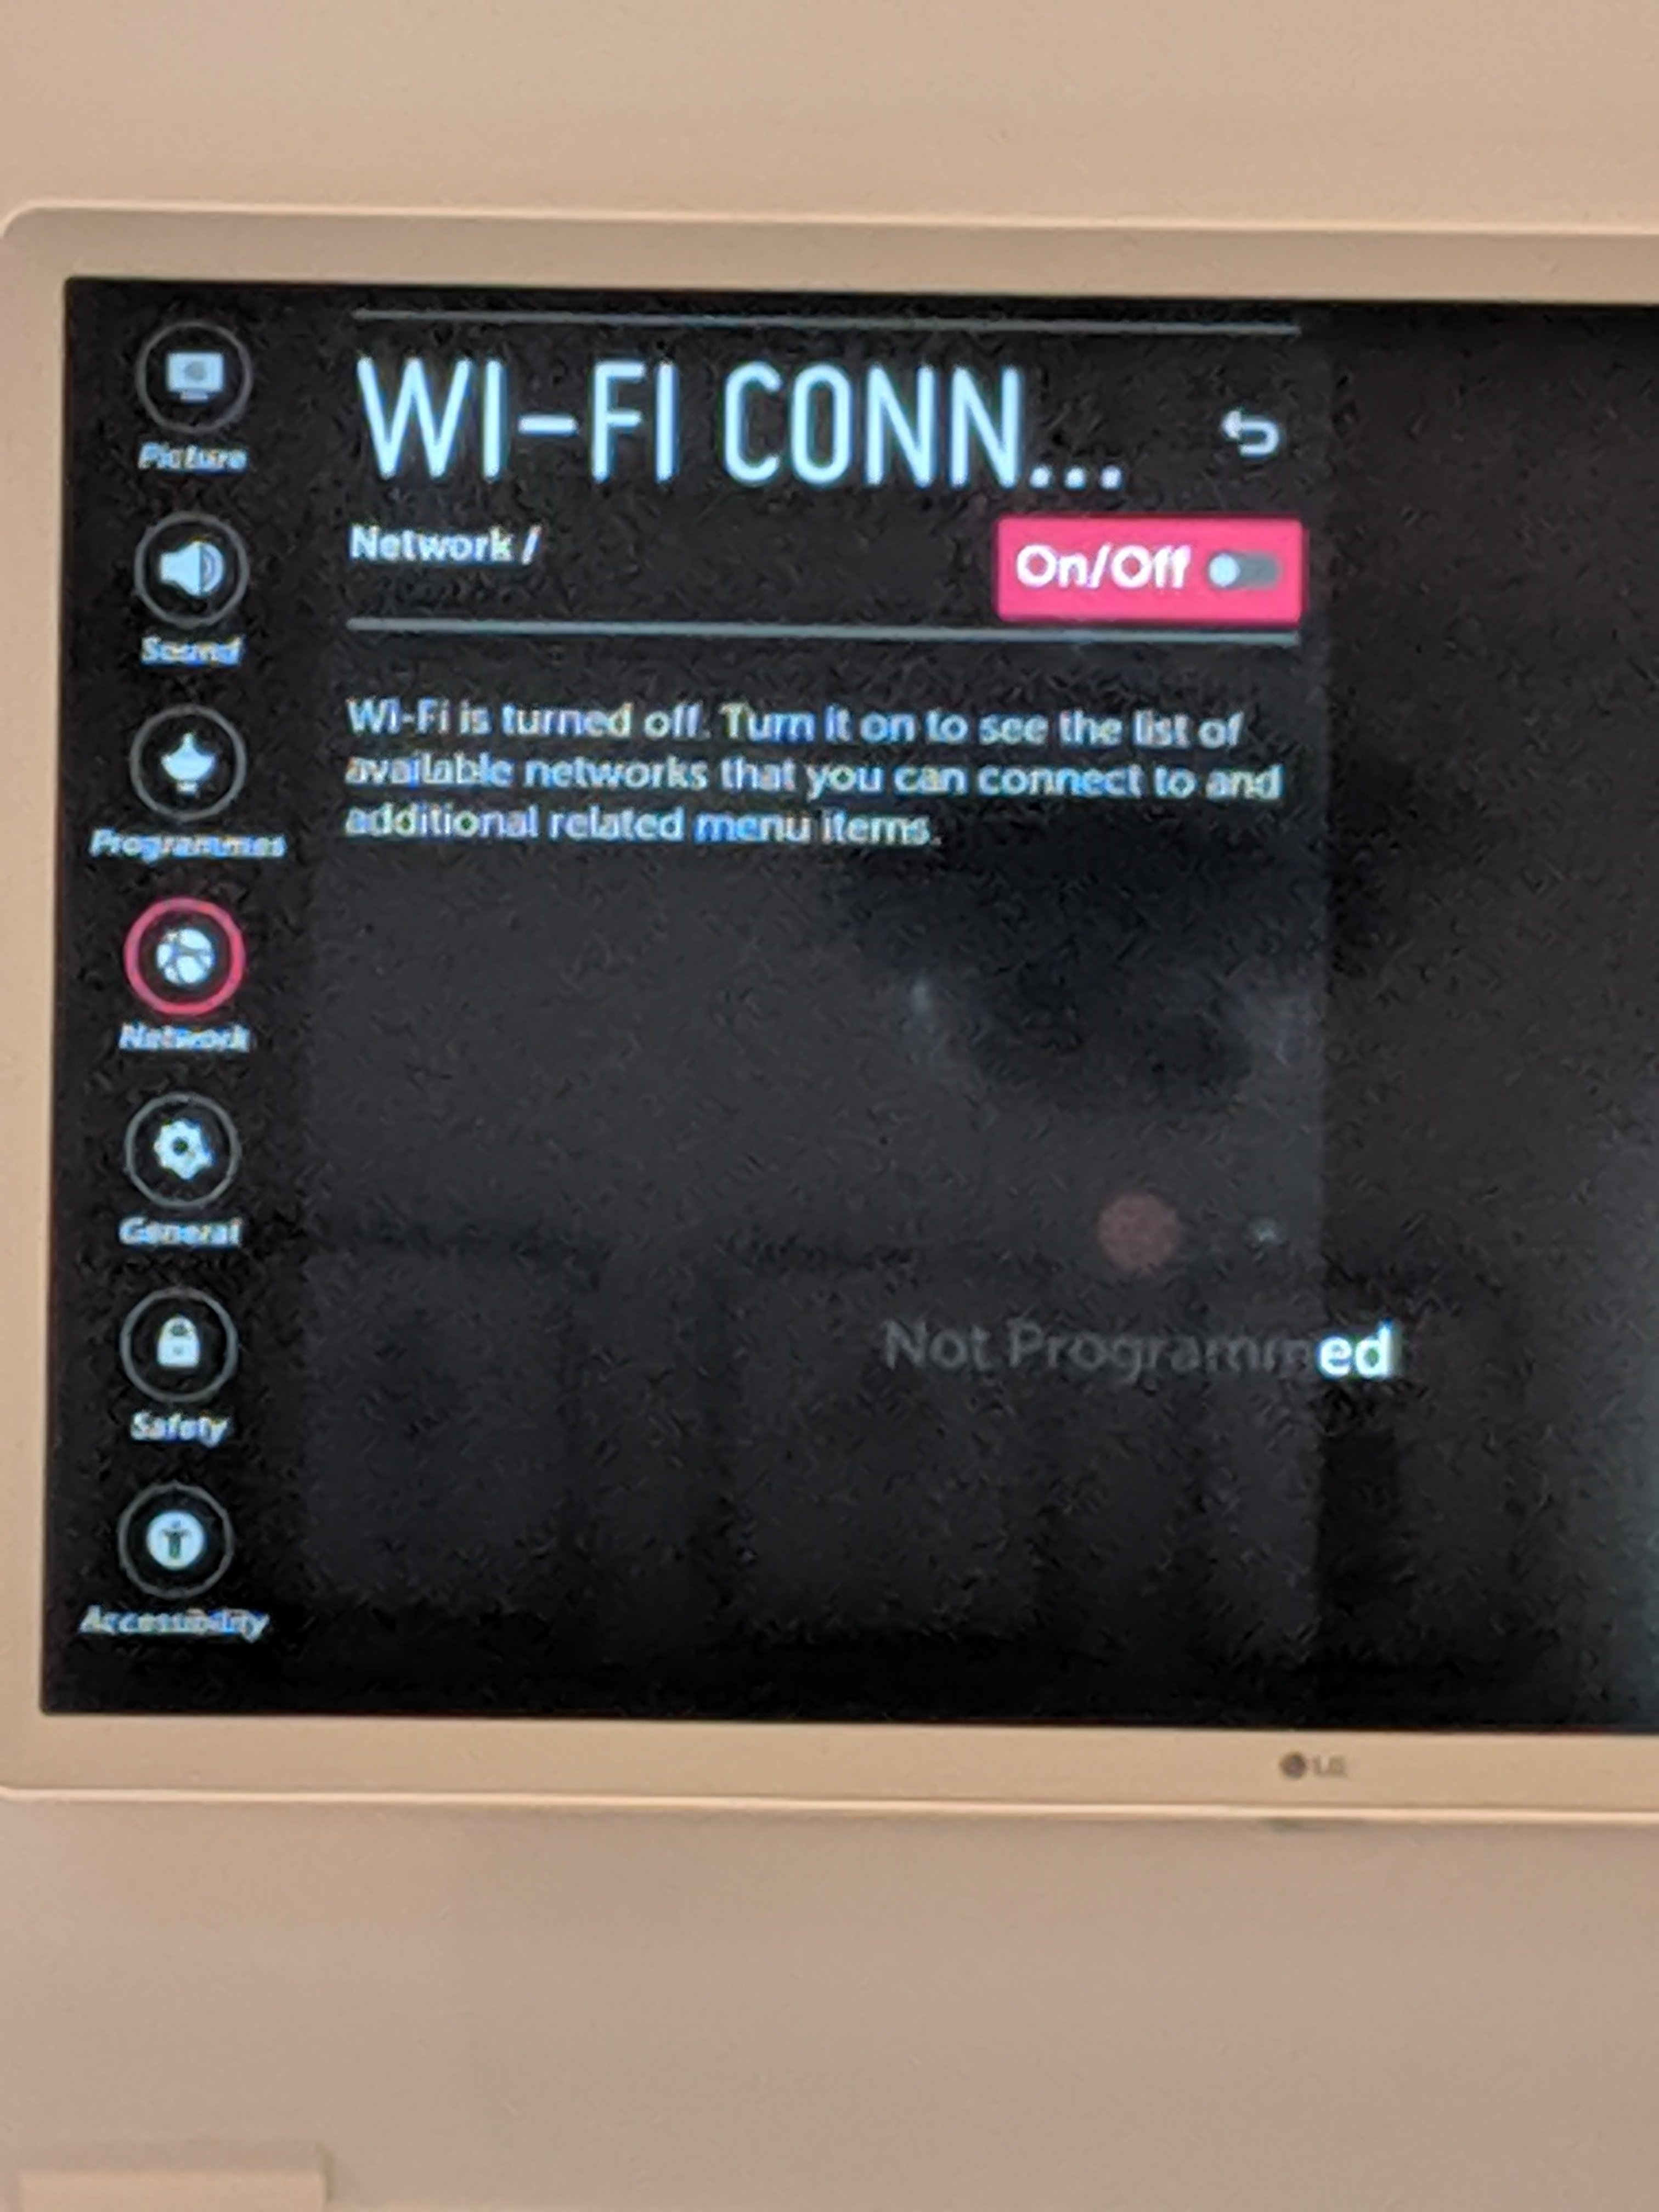 WIFI ON/OFF BUTTON?? LG webOS Smart TV Questions LG webOS